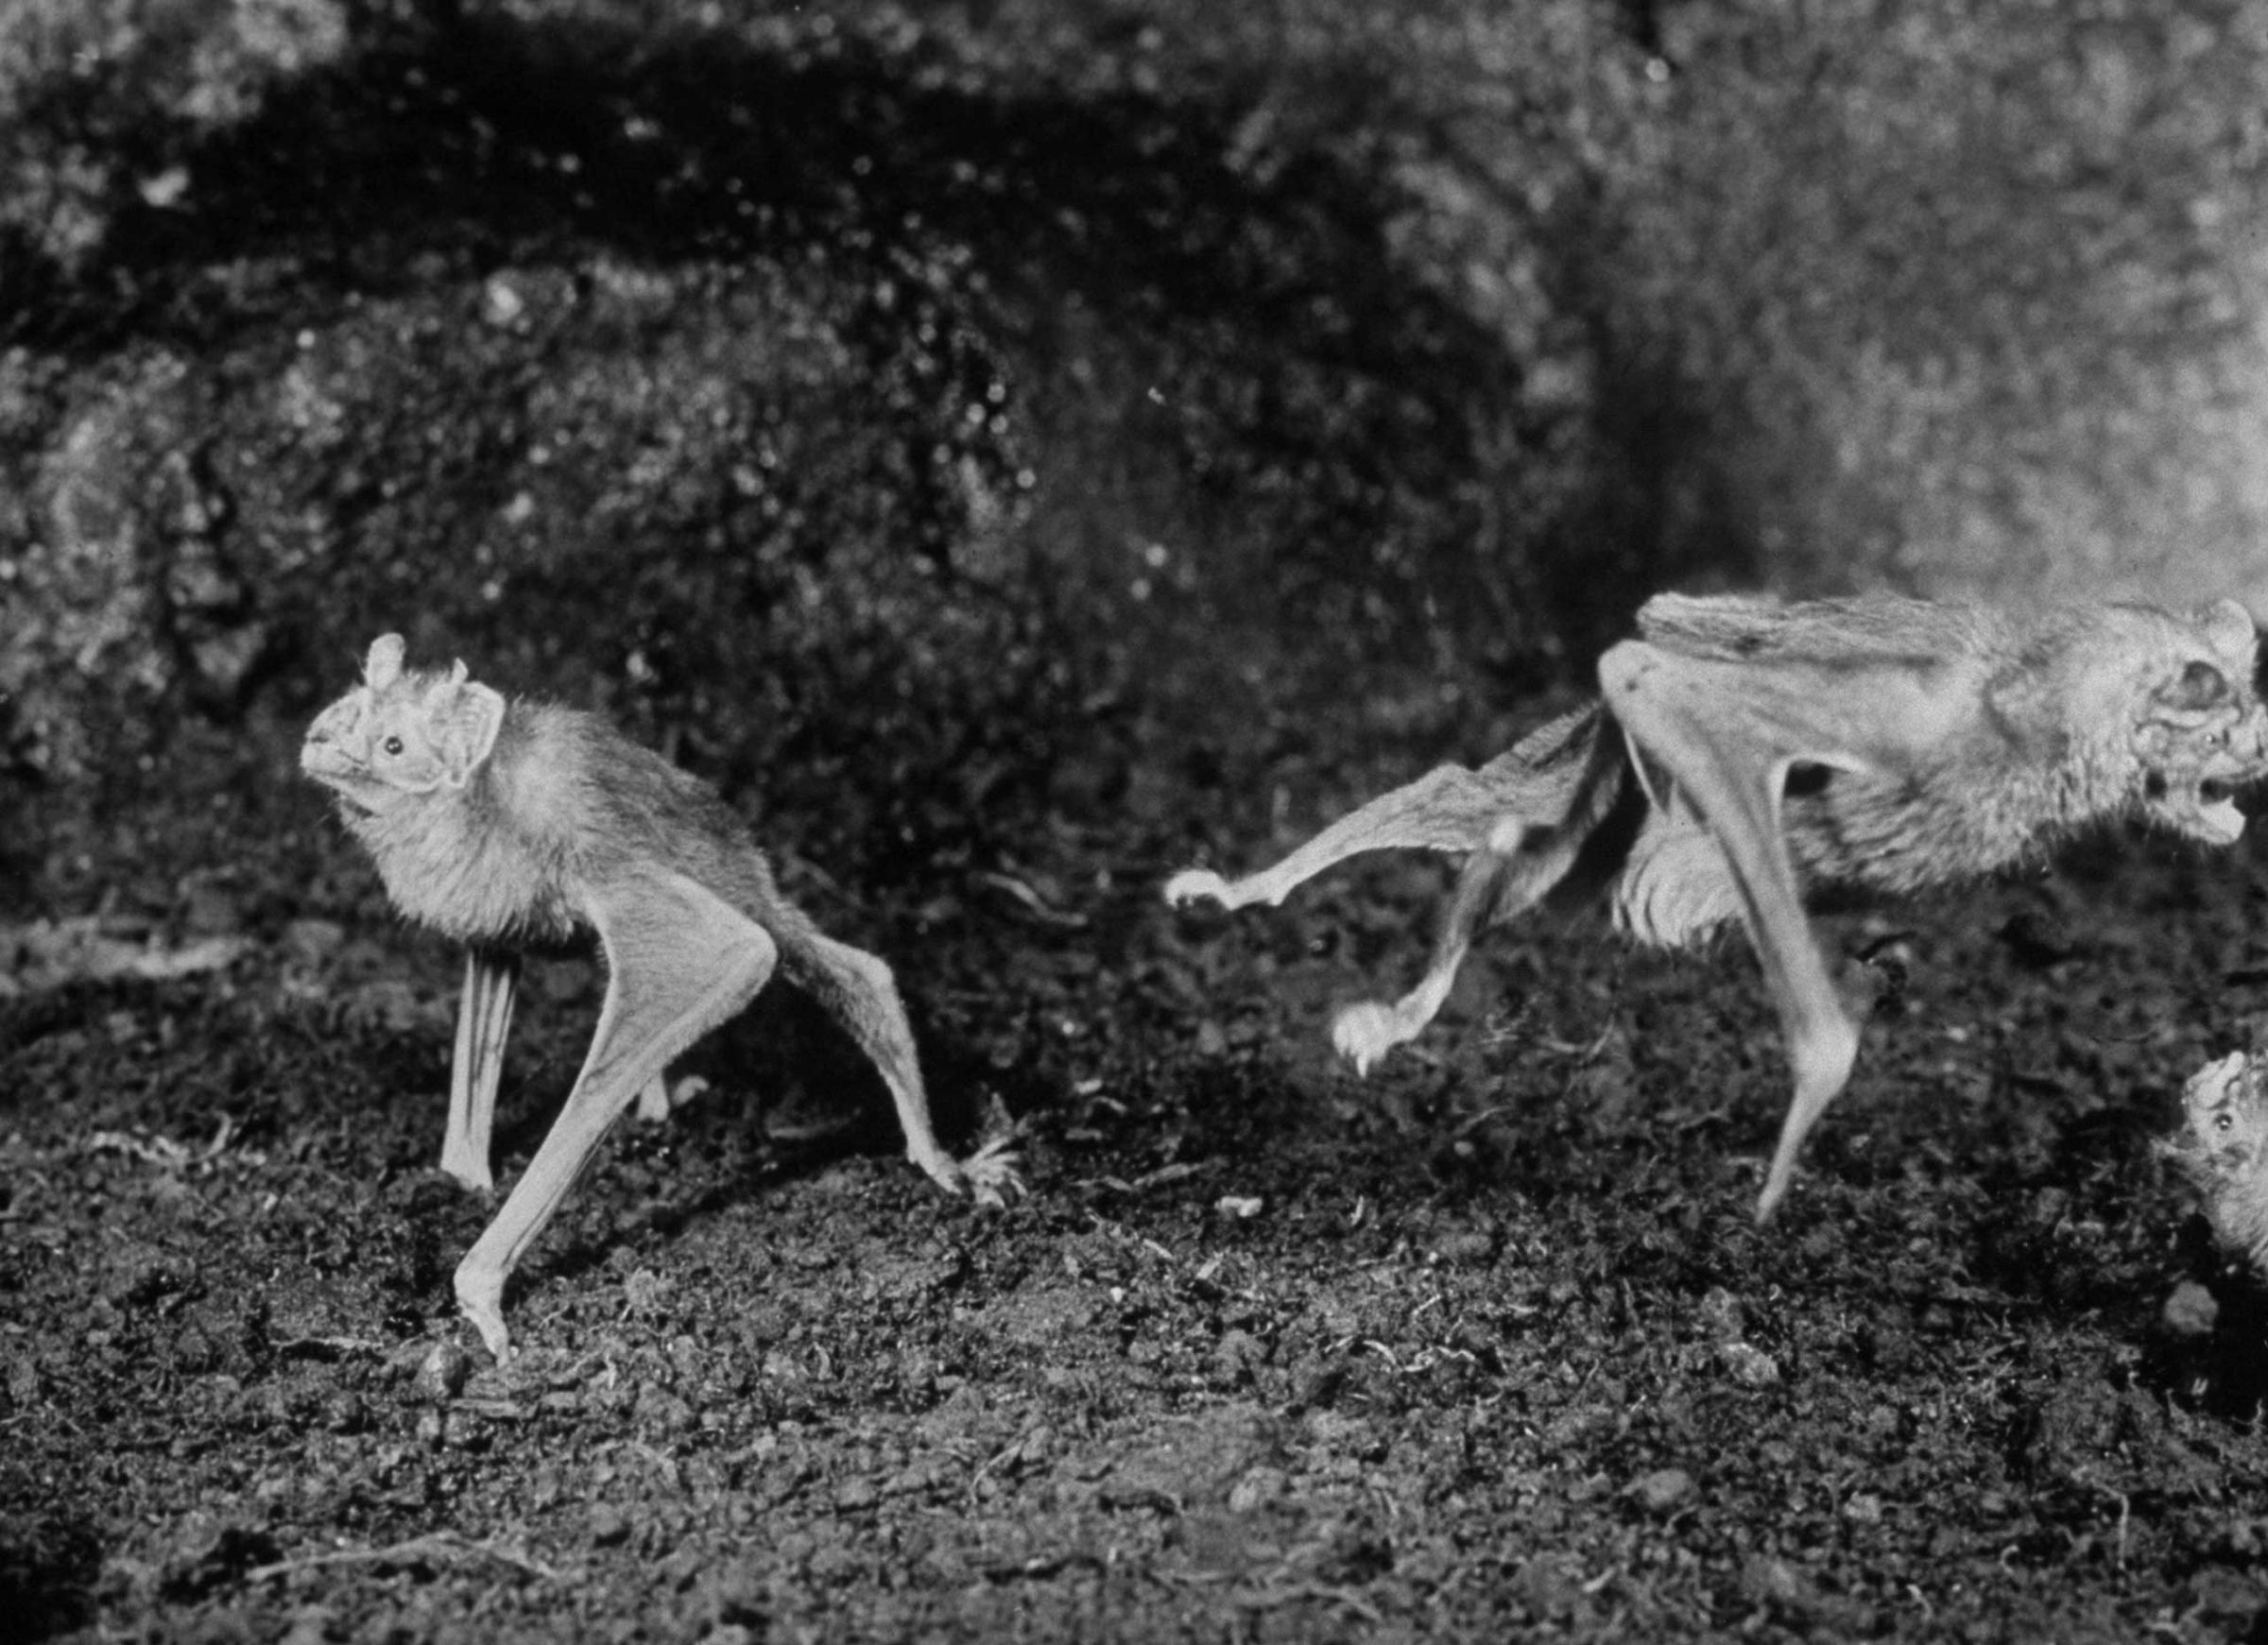 Caption that accompanied this picture in the March 29, 1968, issue of LIFE: "As agile as frogs, vampire bats in the Cincinnati zoo hop and leap about their cage."